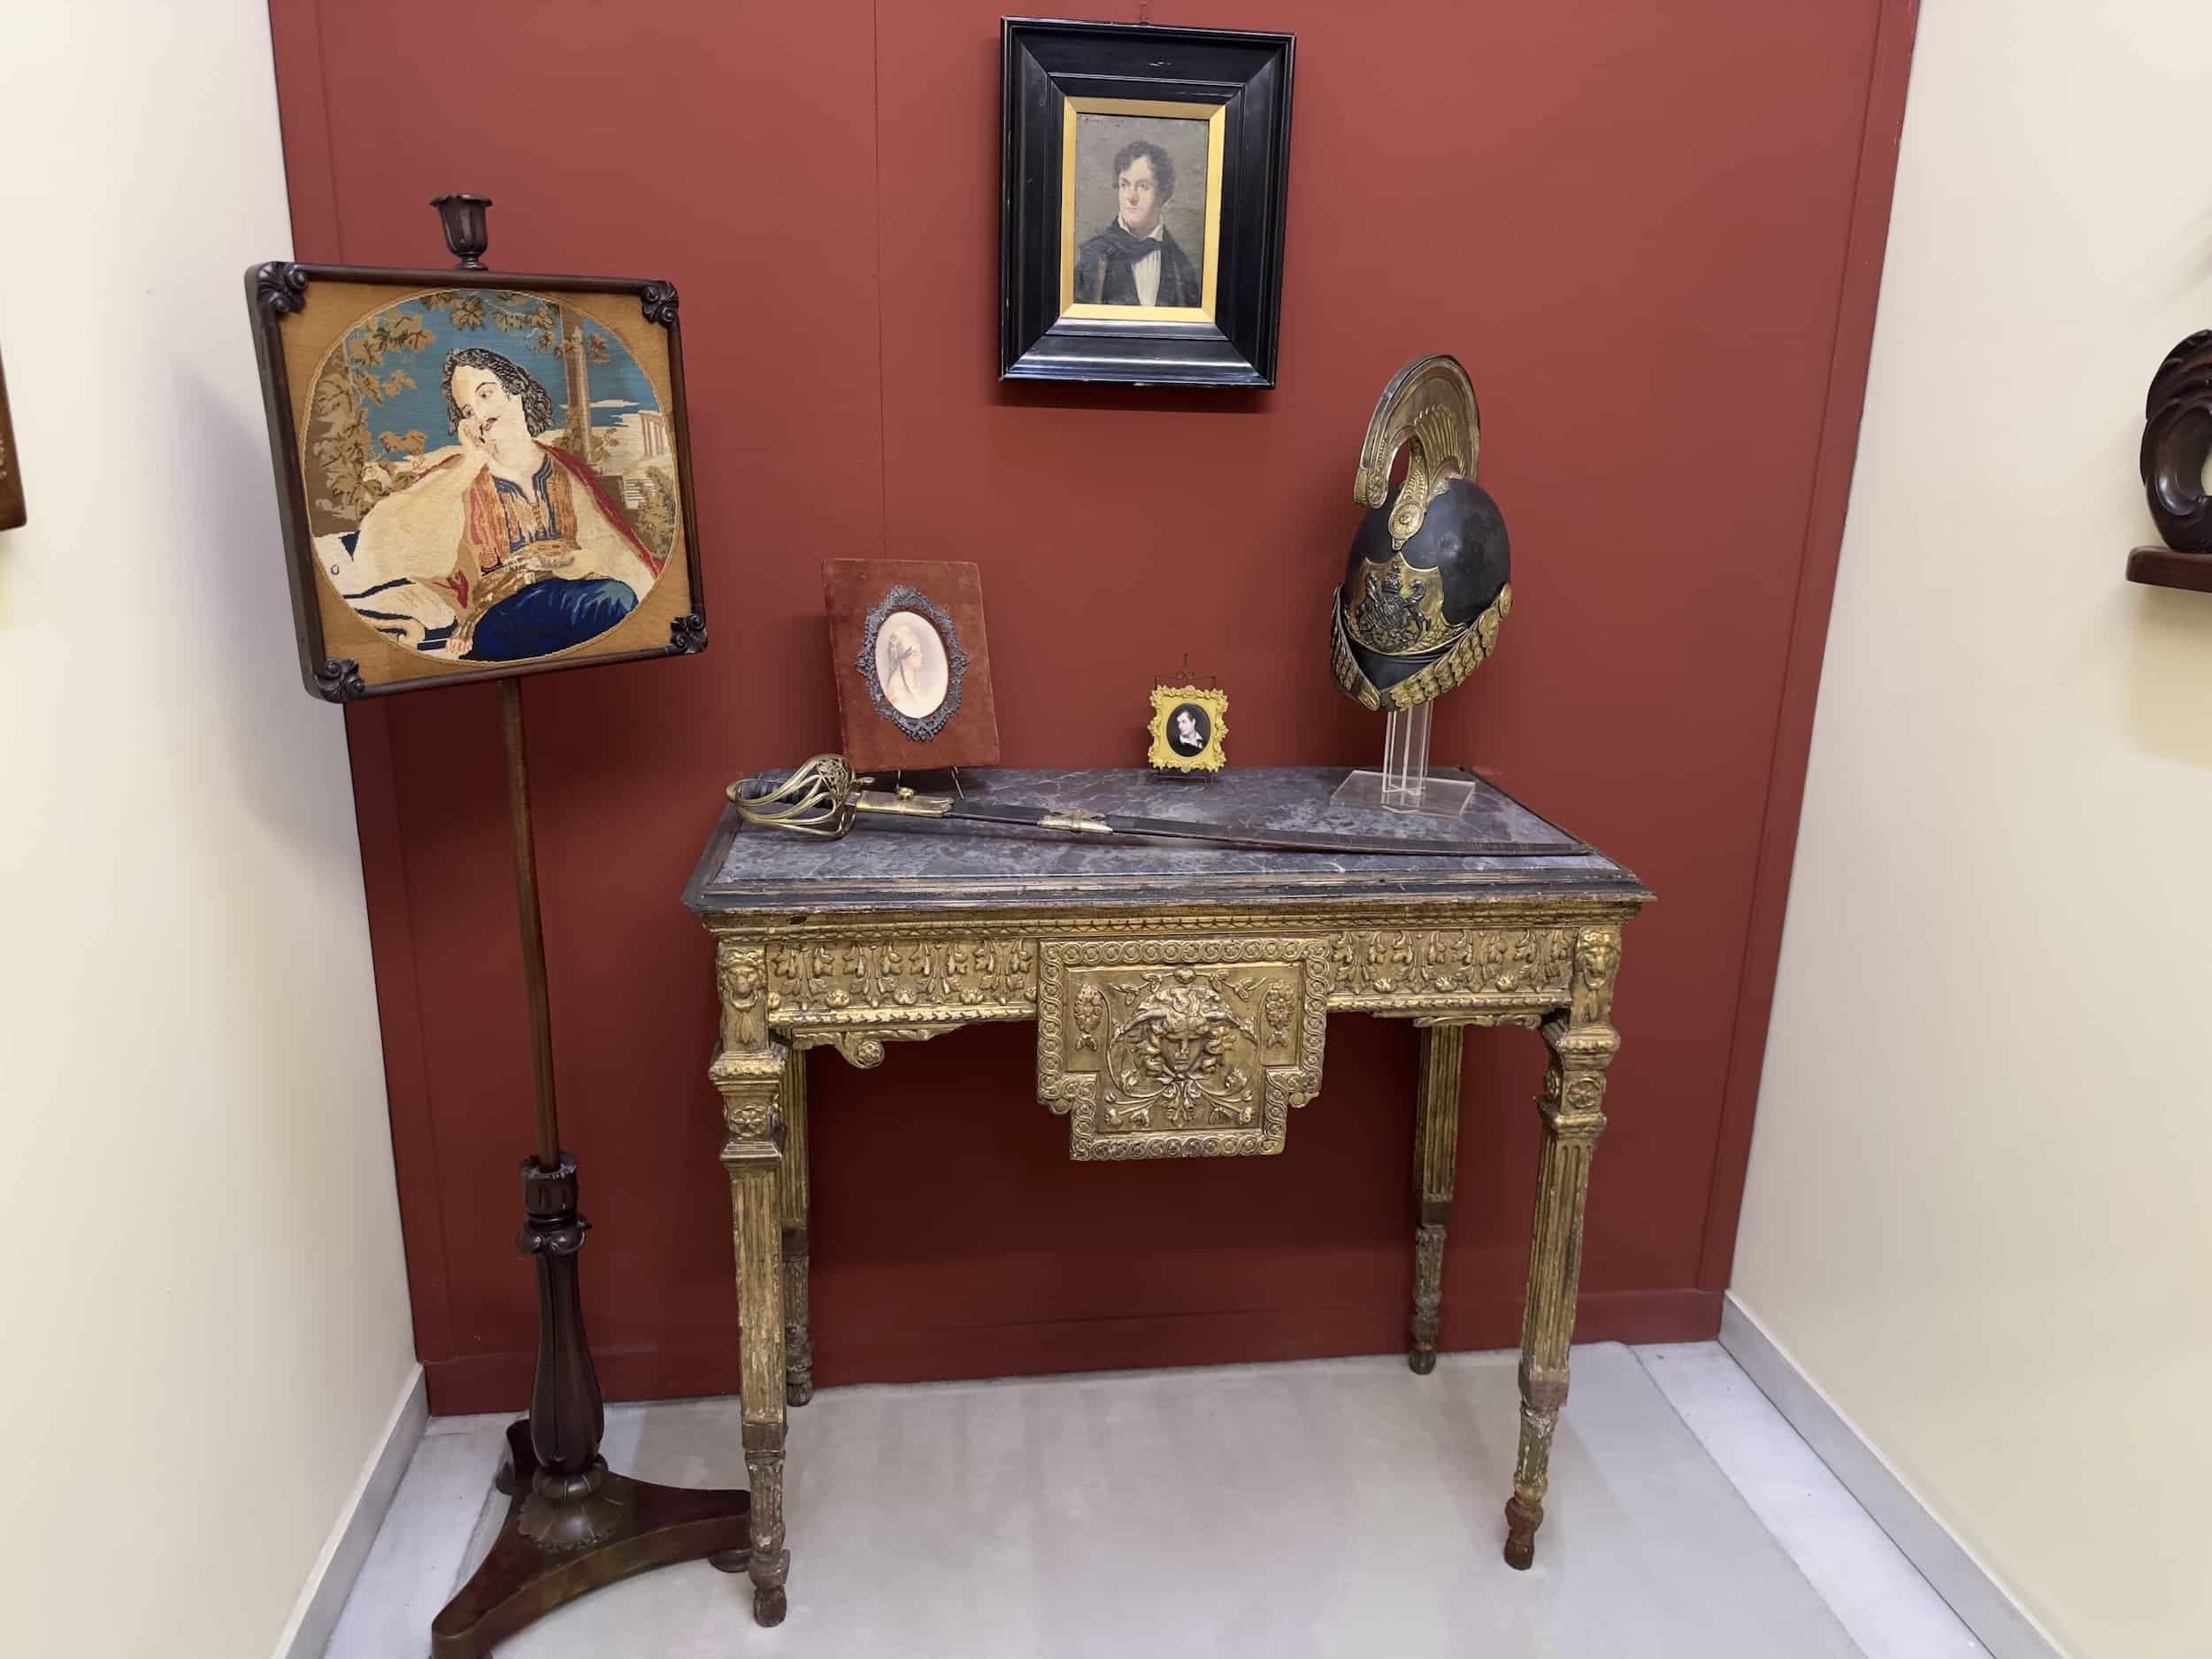 Items belonging to Lord Byron at the National Historical Museum in Athens, Greece